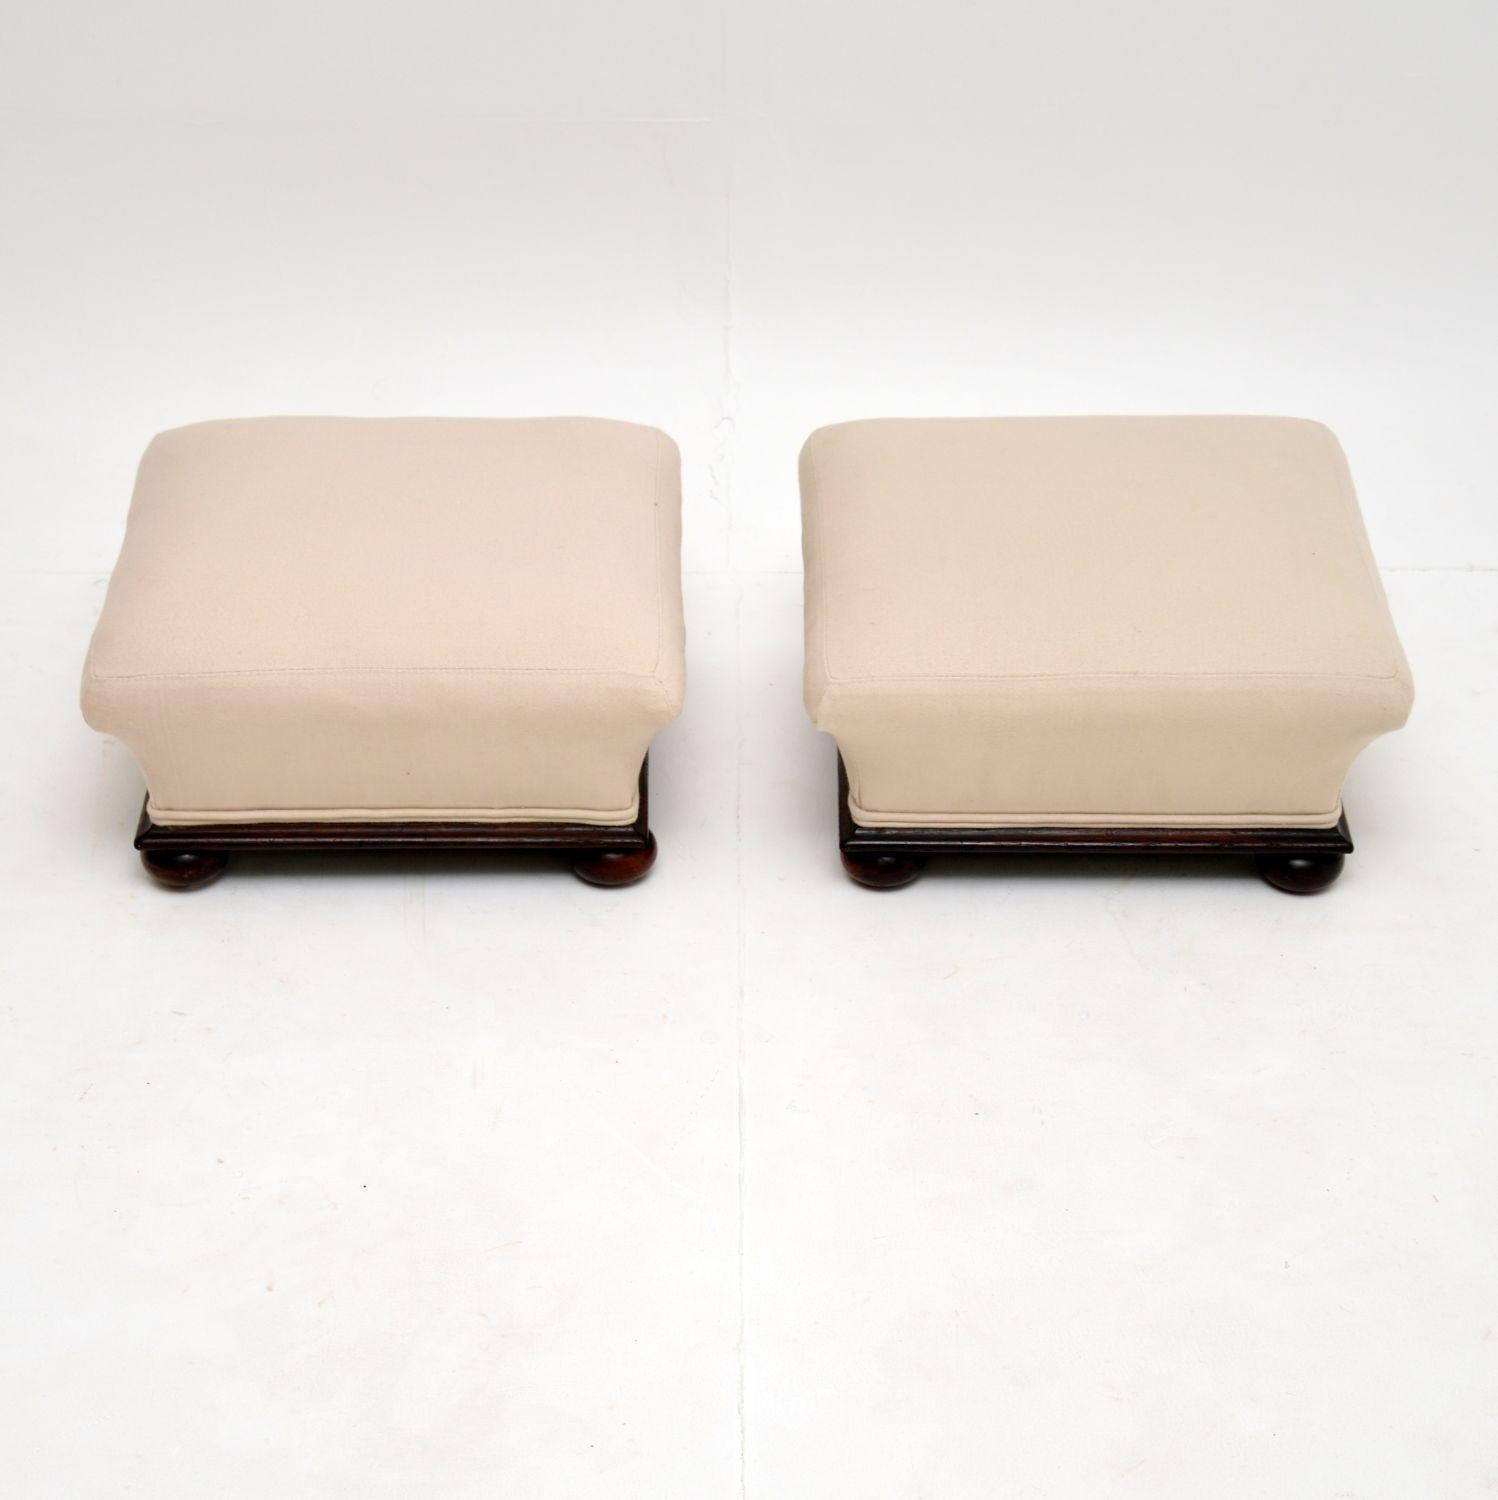 A beautiful shaped and very well made pair of Victorian foot stools, dating from circa 1860-1880 period.

They have solid polished wood bases with bun feet. We have had these fully re-upholstered in our cream cotton fabric, they are in excellent